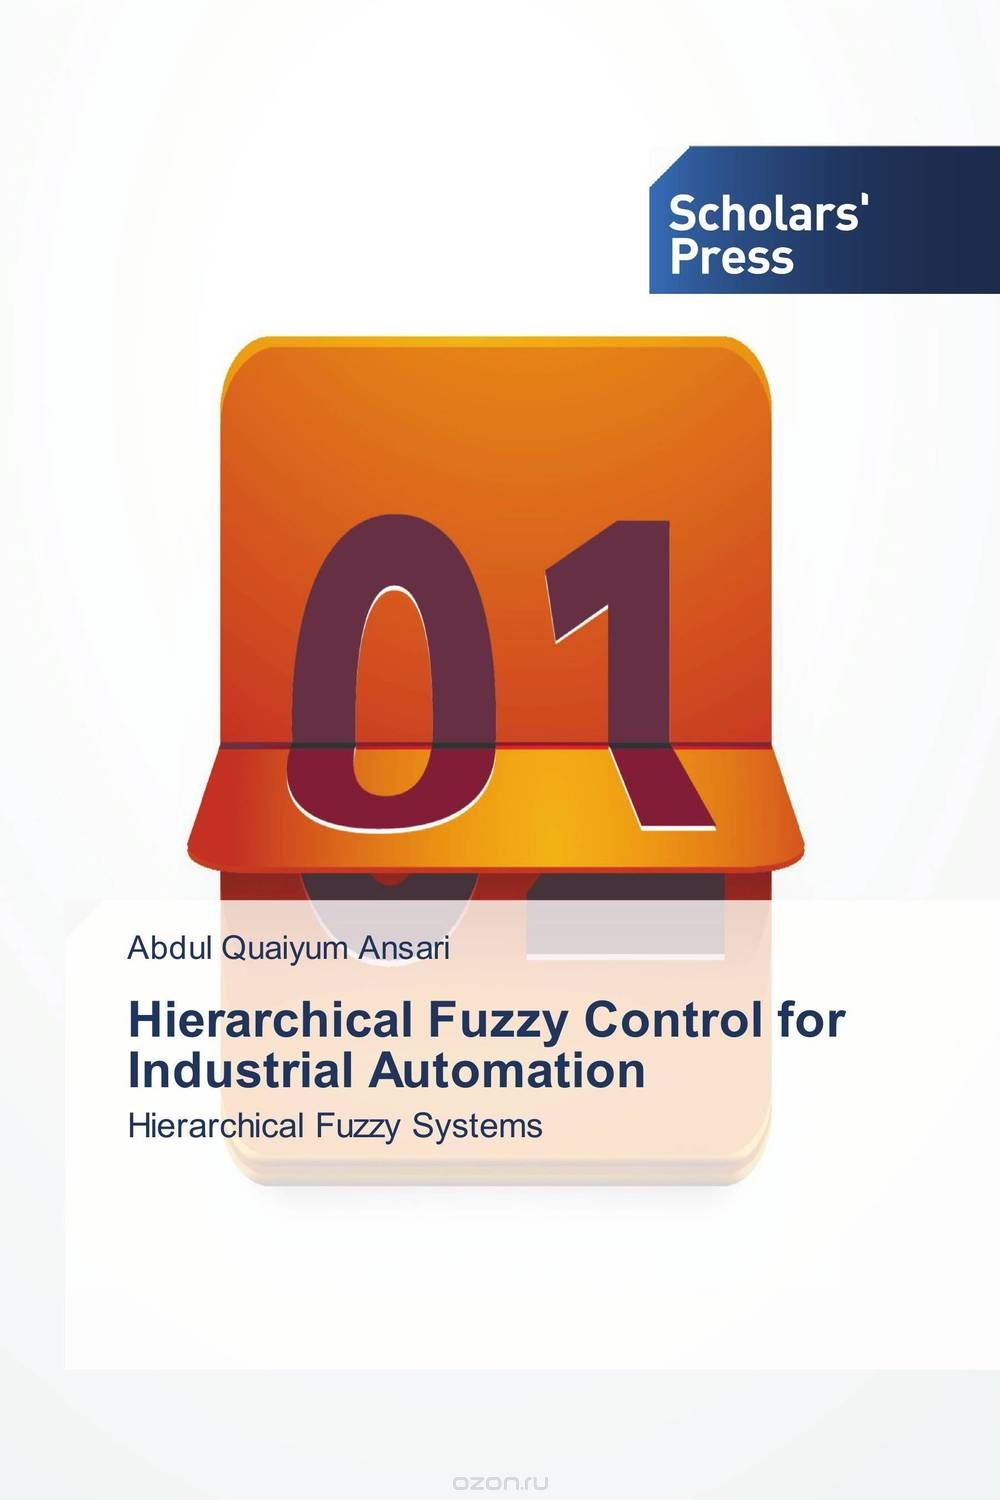 Скачать книгу "Hierarchical Fuzzy Control for Industrial Automation"